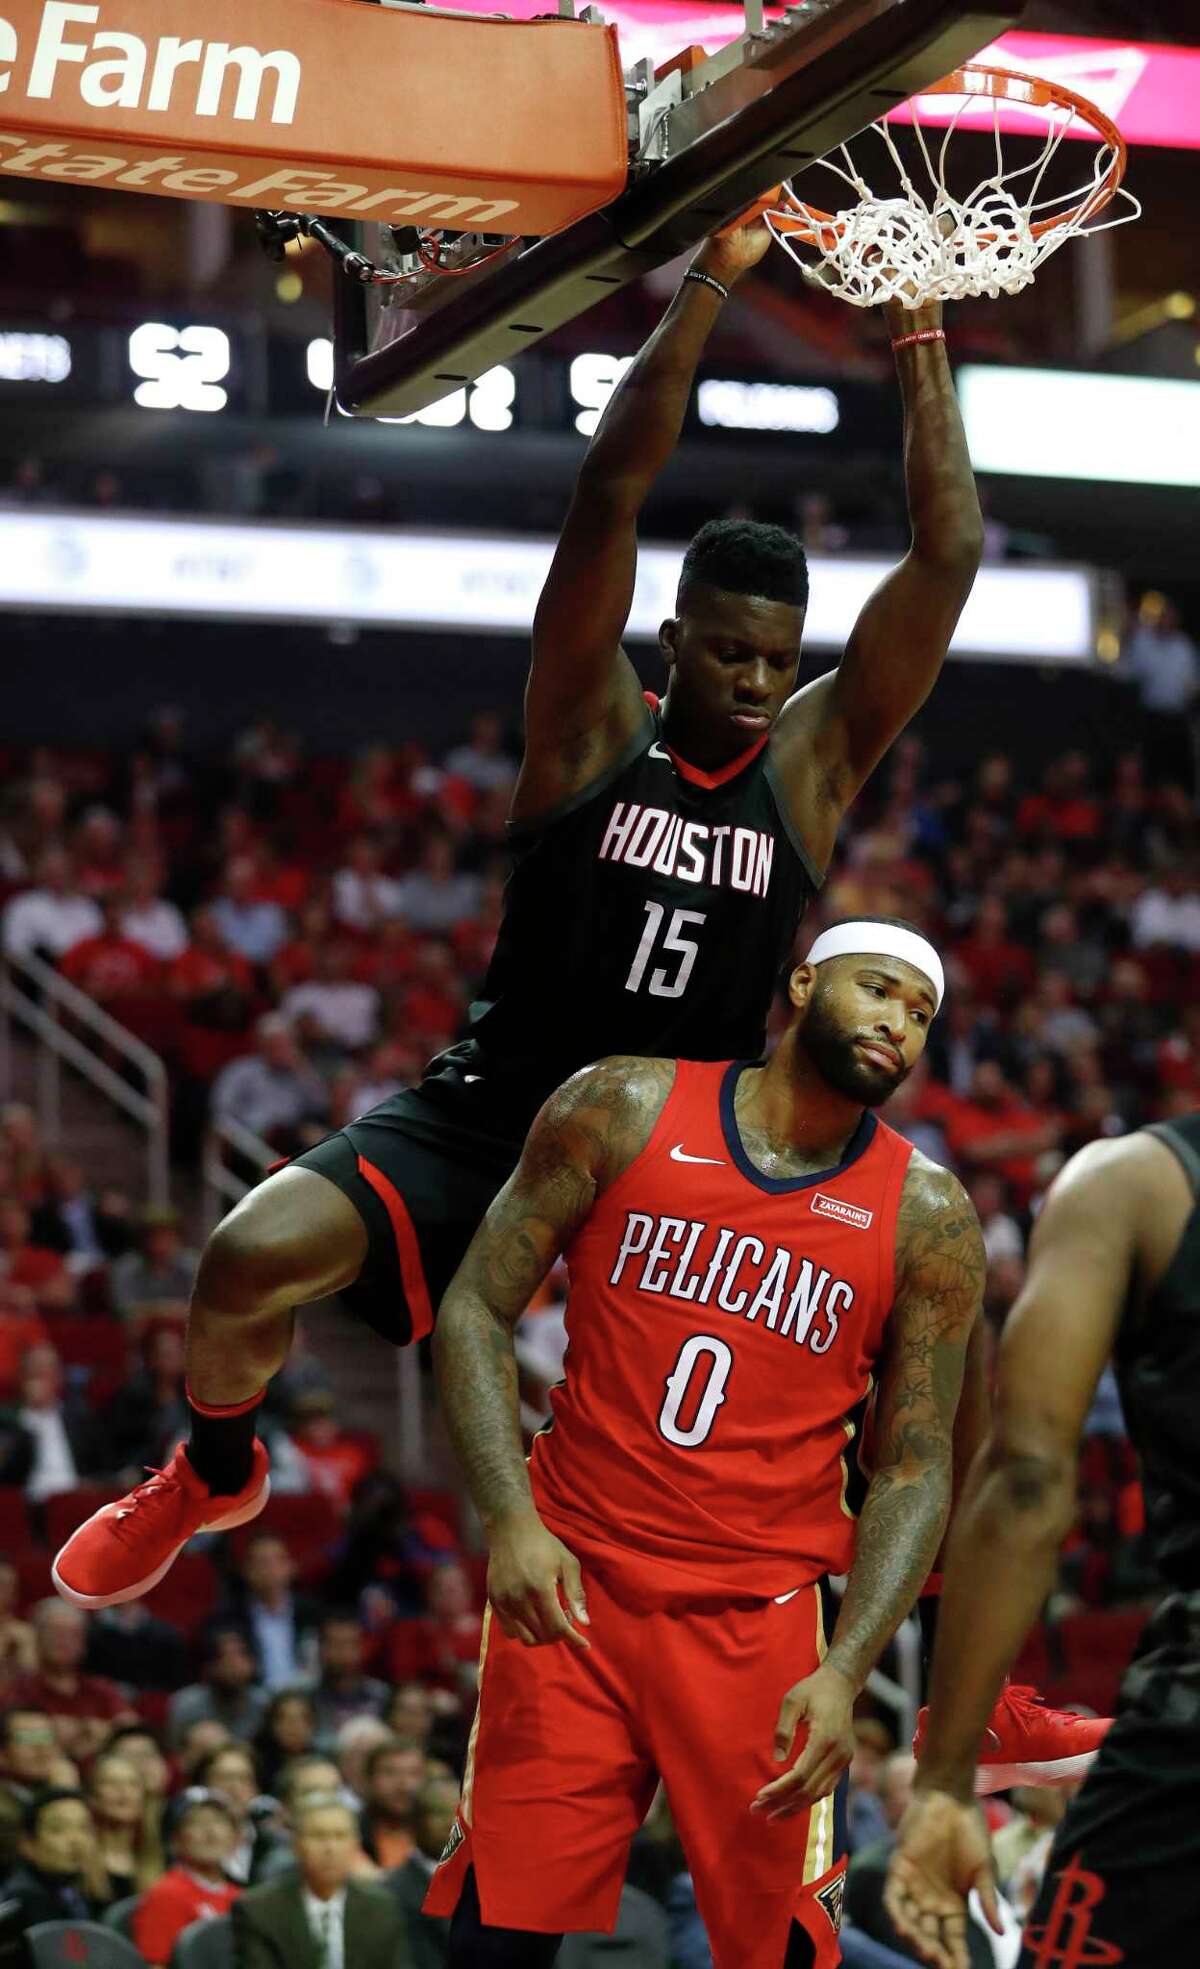 Houston Rockets center Clint Capela (15) dunks the ball over New Orleans Pelicans center DeMarcus Cousins (0) during the first half of an NBA game at Toyota Center, Monday, Dec. 11, 2017, in Houston.